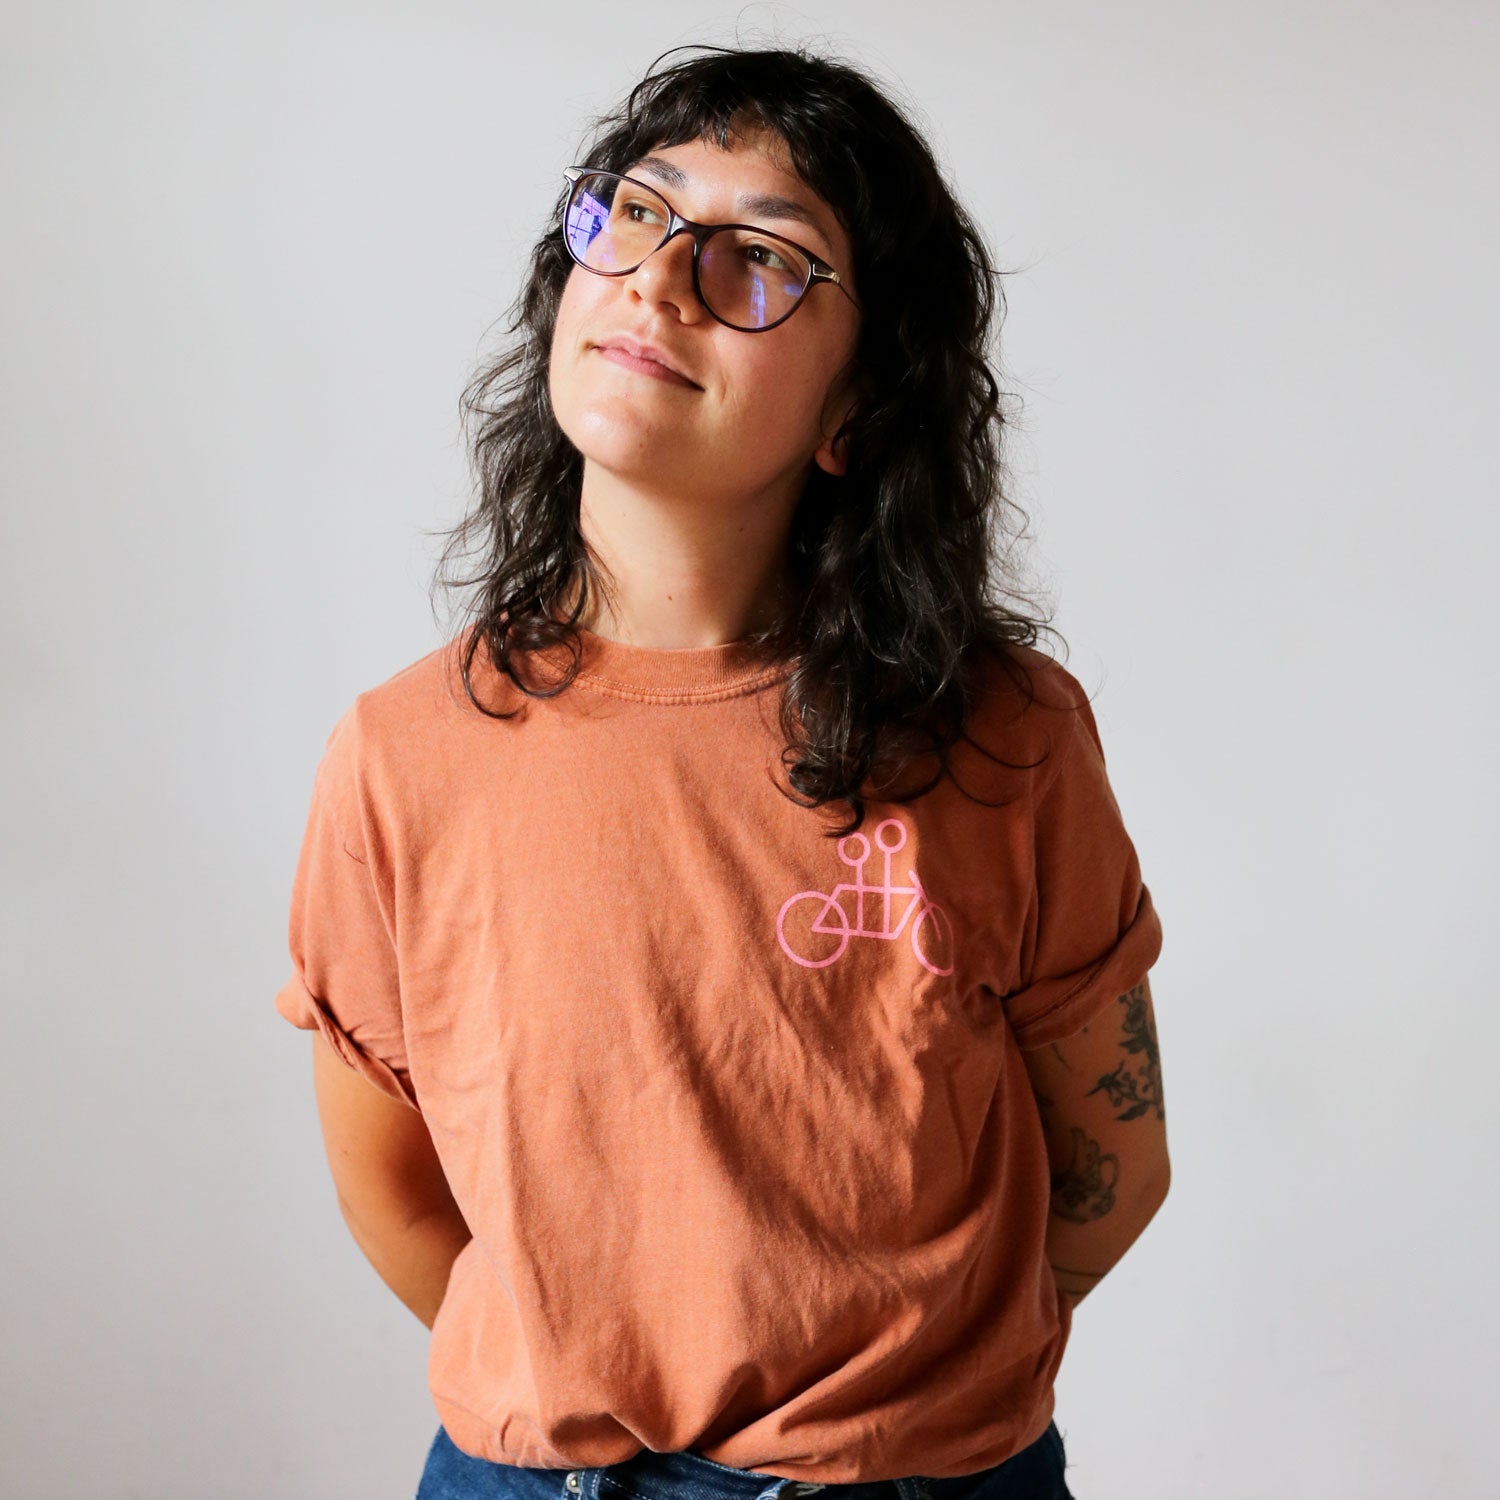 A person with long, wavy hair and wearing glasses stands against a plain background, looking slightly upwards and smiling. They are wearing a casual elegant, orange cotton Tandem Coffee Roasters Bike + Tandem Coffee Tee with a pink bicycle graphic and have tattoos on their left arm. Their hands are behind their back.